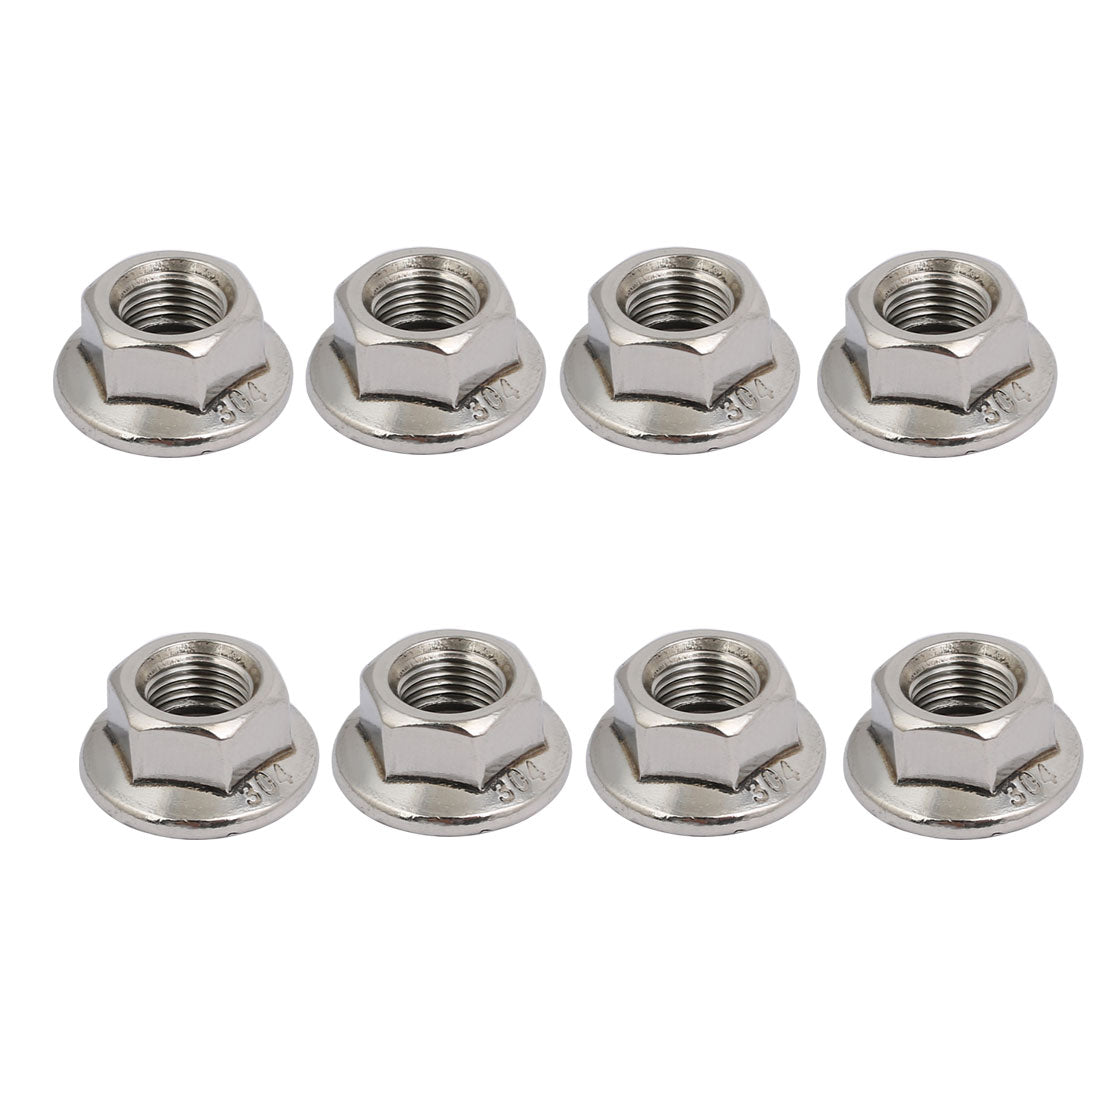 uxcell Uxcell 8pcs M10 x 1mm Pitch Metric Fine Thread 304 Stainless Steel Hex Flange Nut